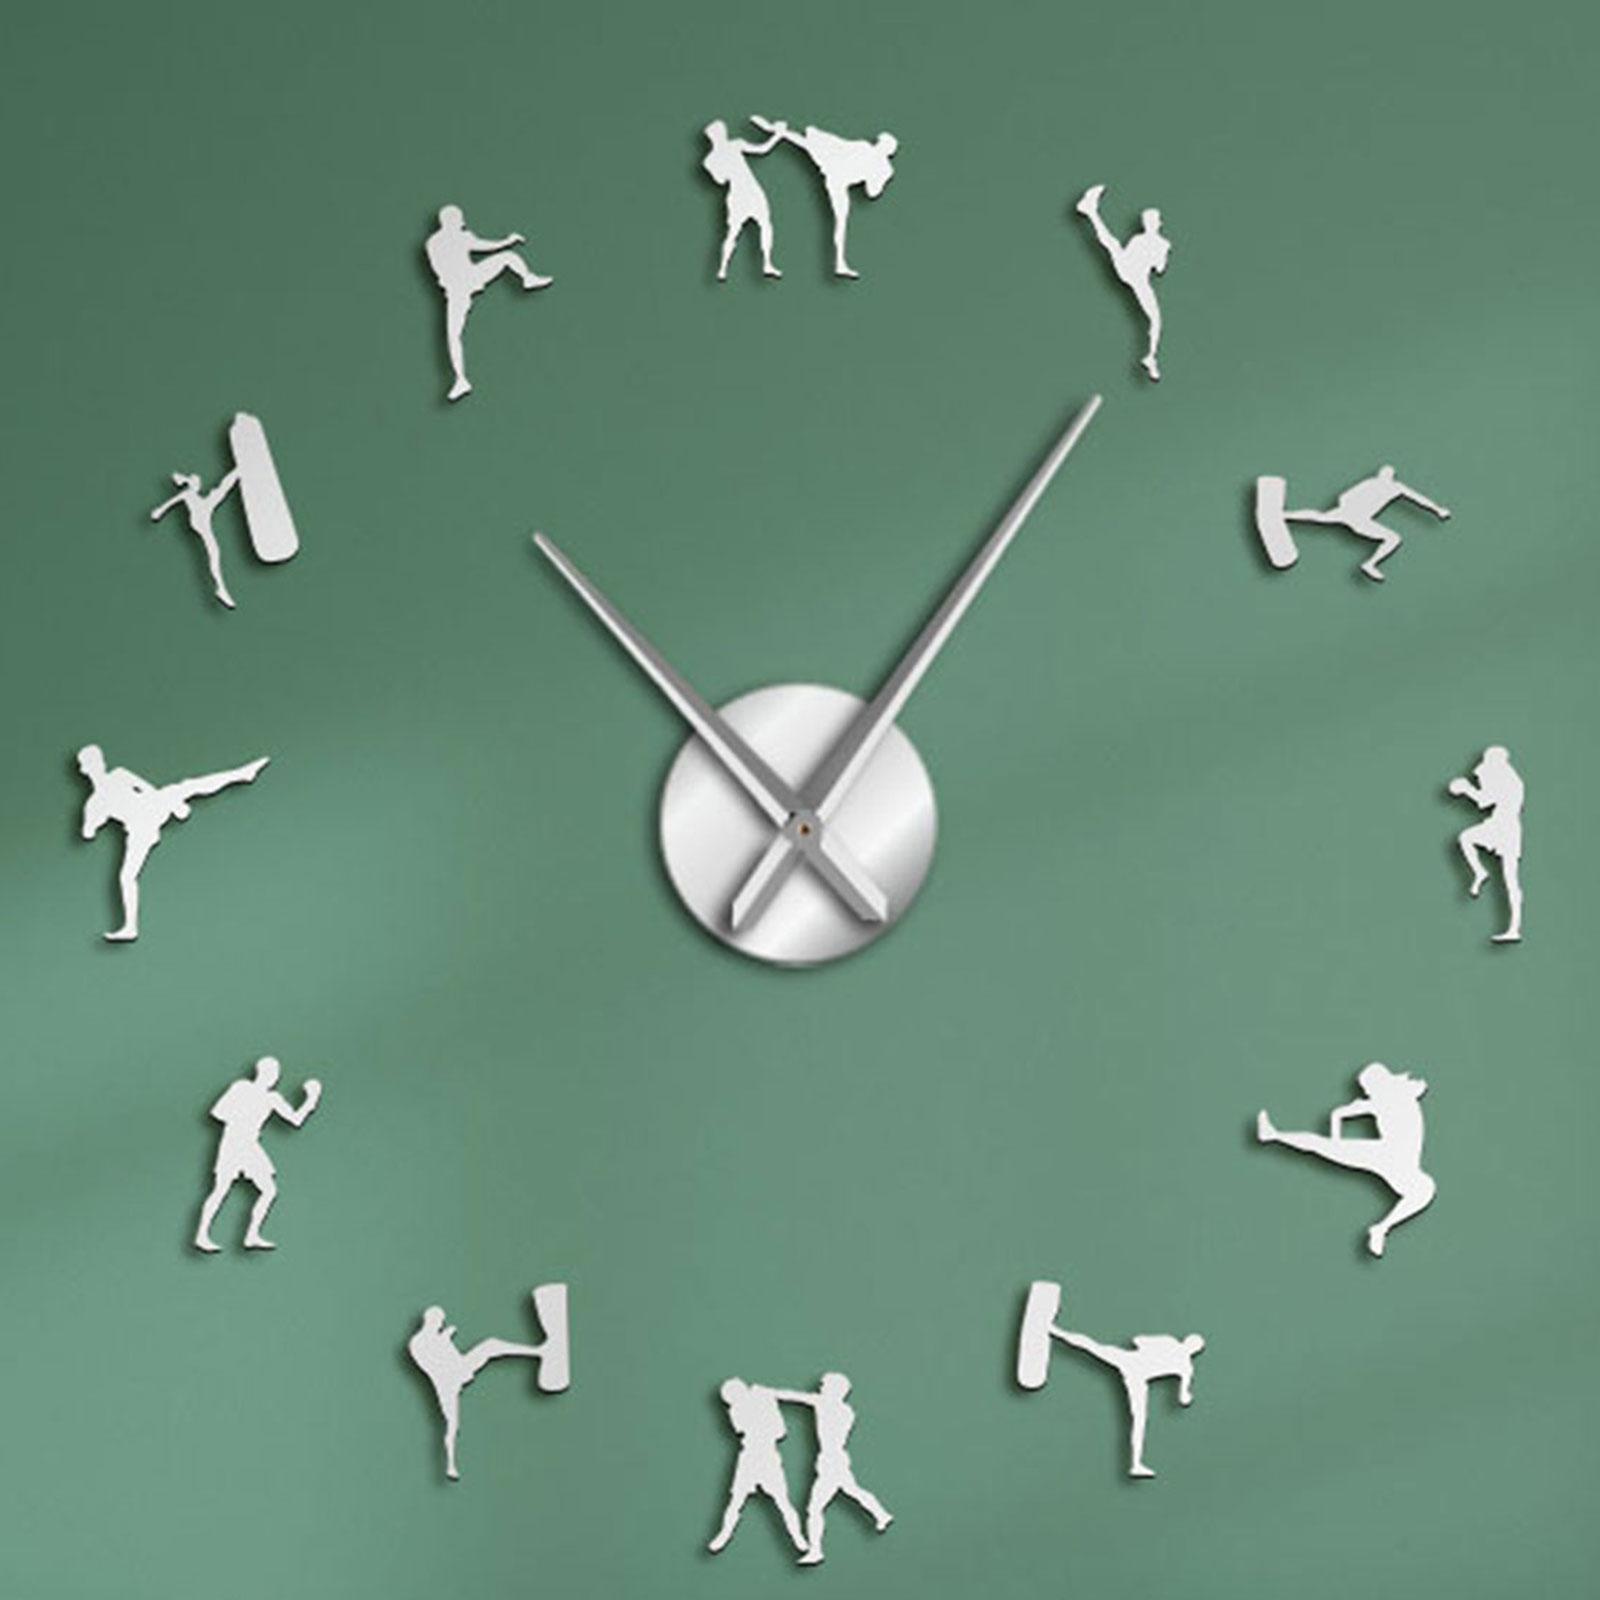 DIY Large 3D Wall Clock Non Ticking for Office Kitchen Home Decoration Argent 47 Inches